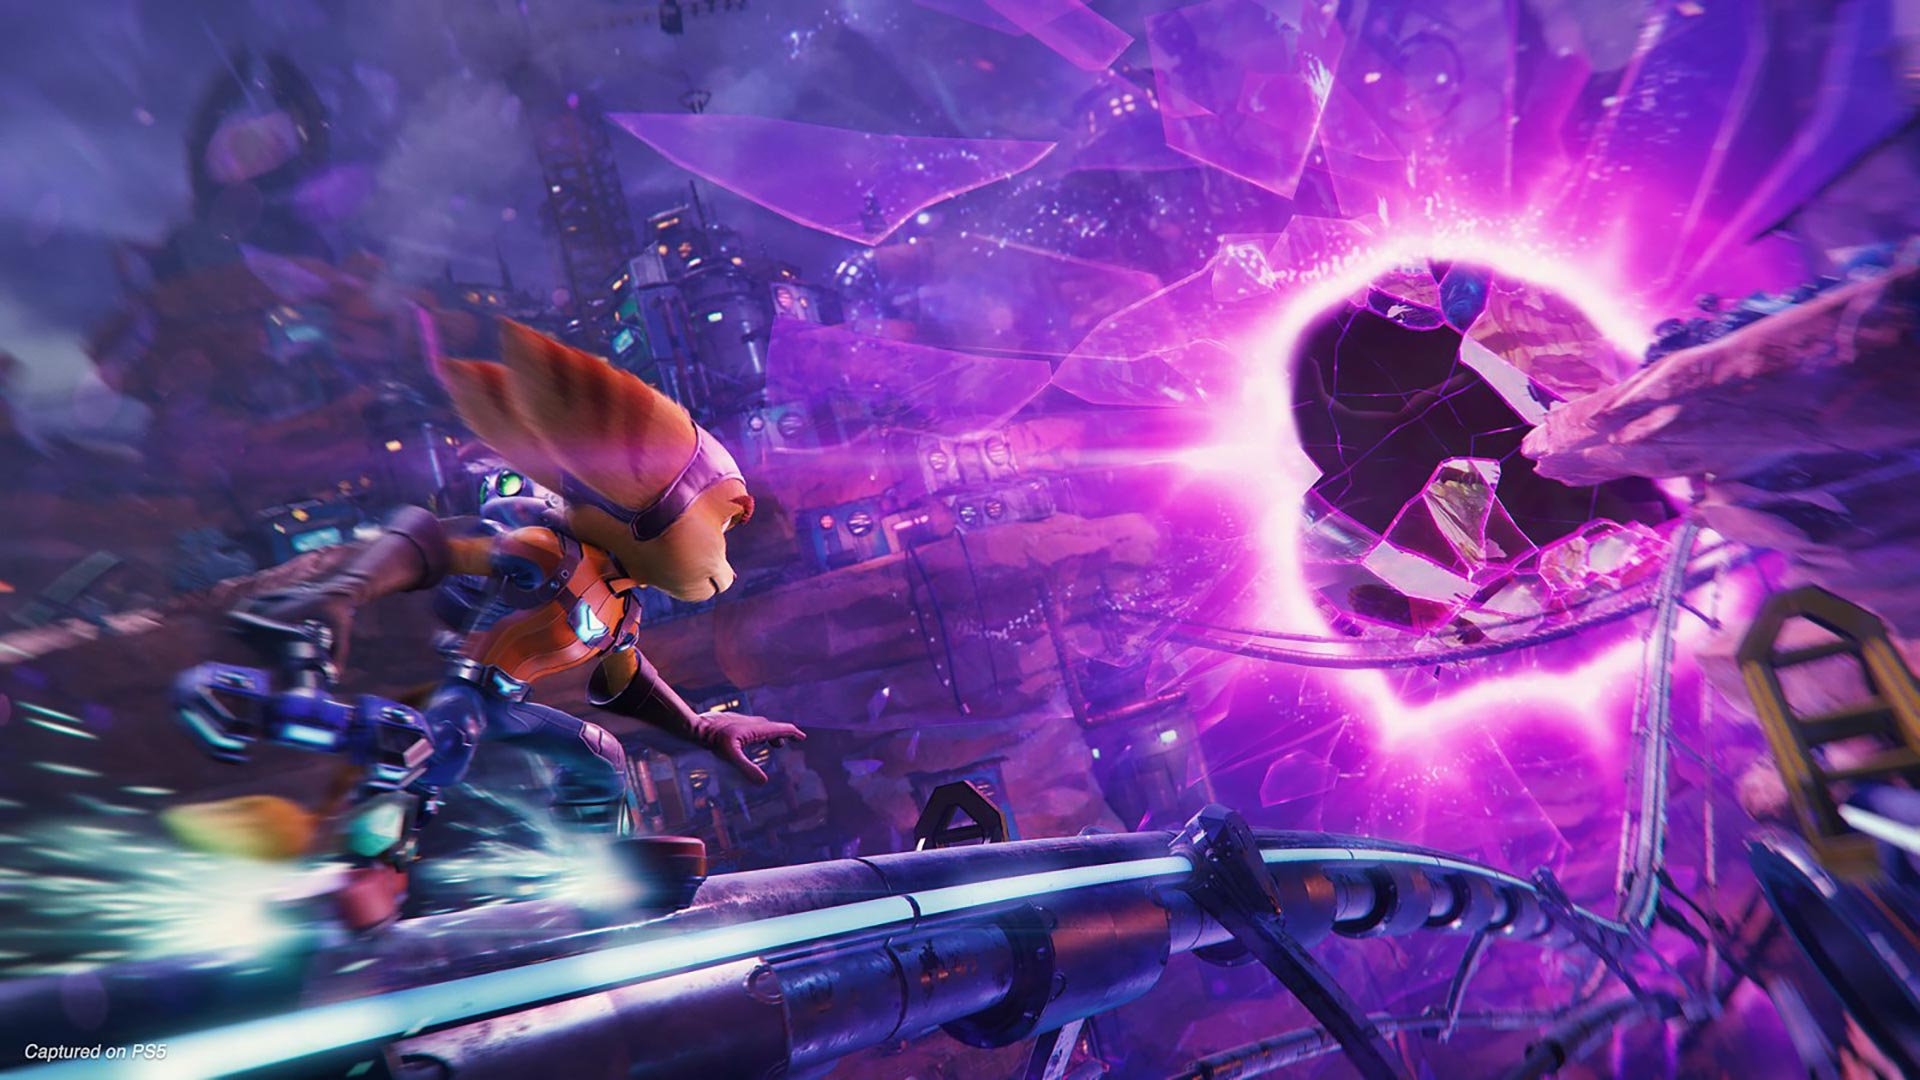 Ratchet and Clank ride a rail into a rift